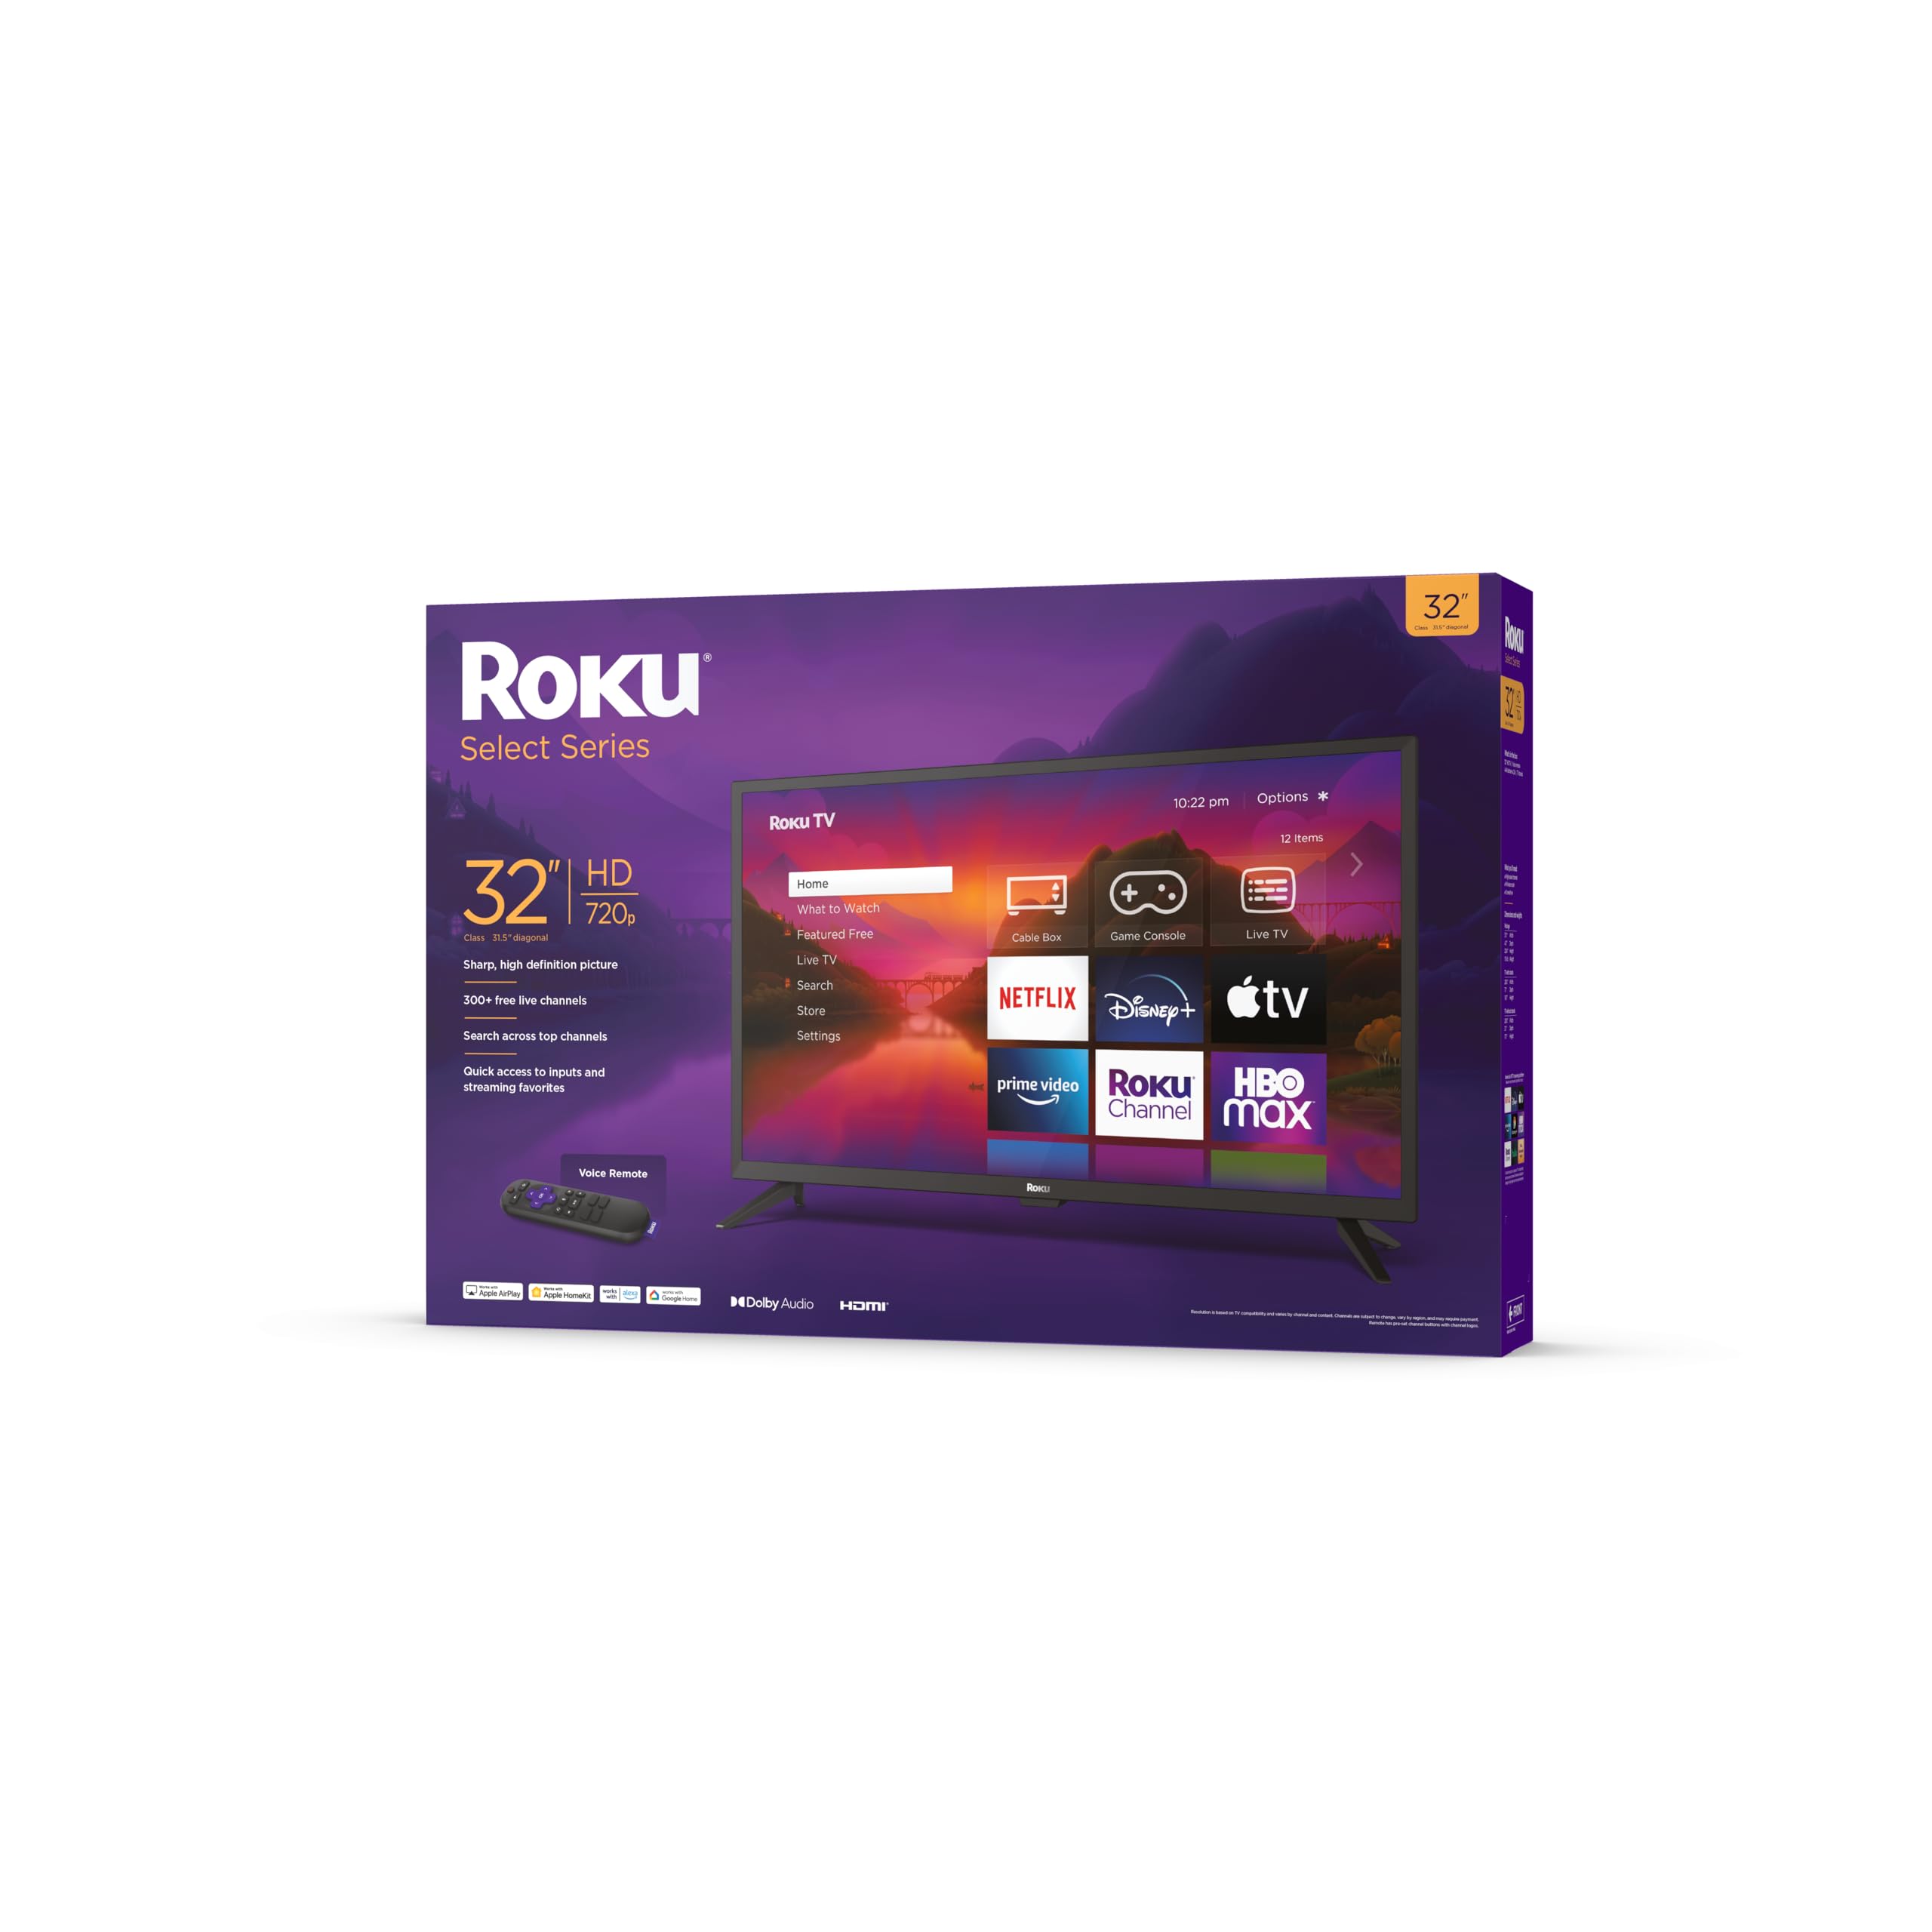 Roku 40″ Select Series 1080p Full HD Smart RokuTV with Voice Remote, Bright Picture, Customizable Home Screen, and Free TV